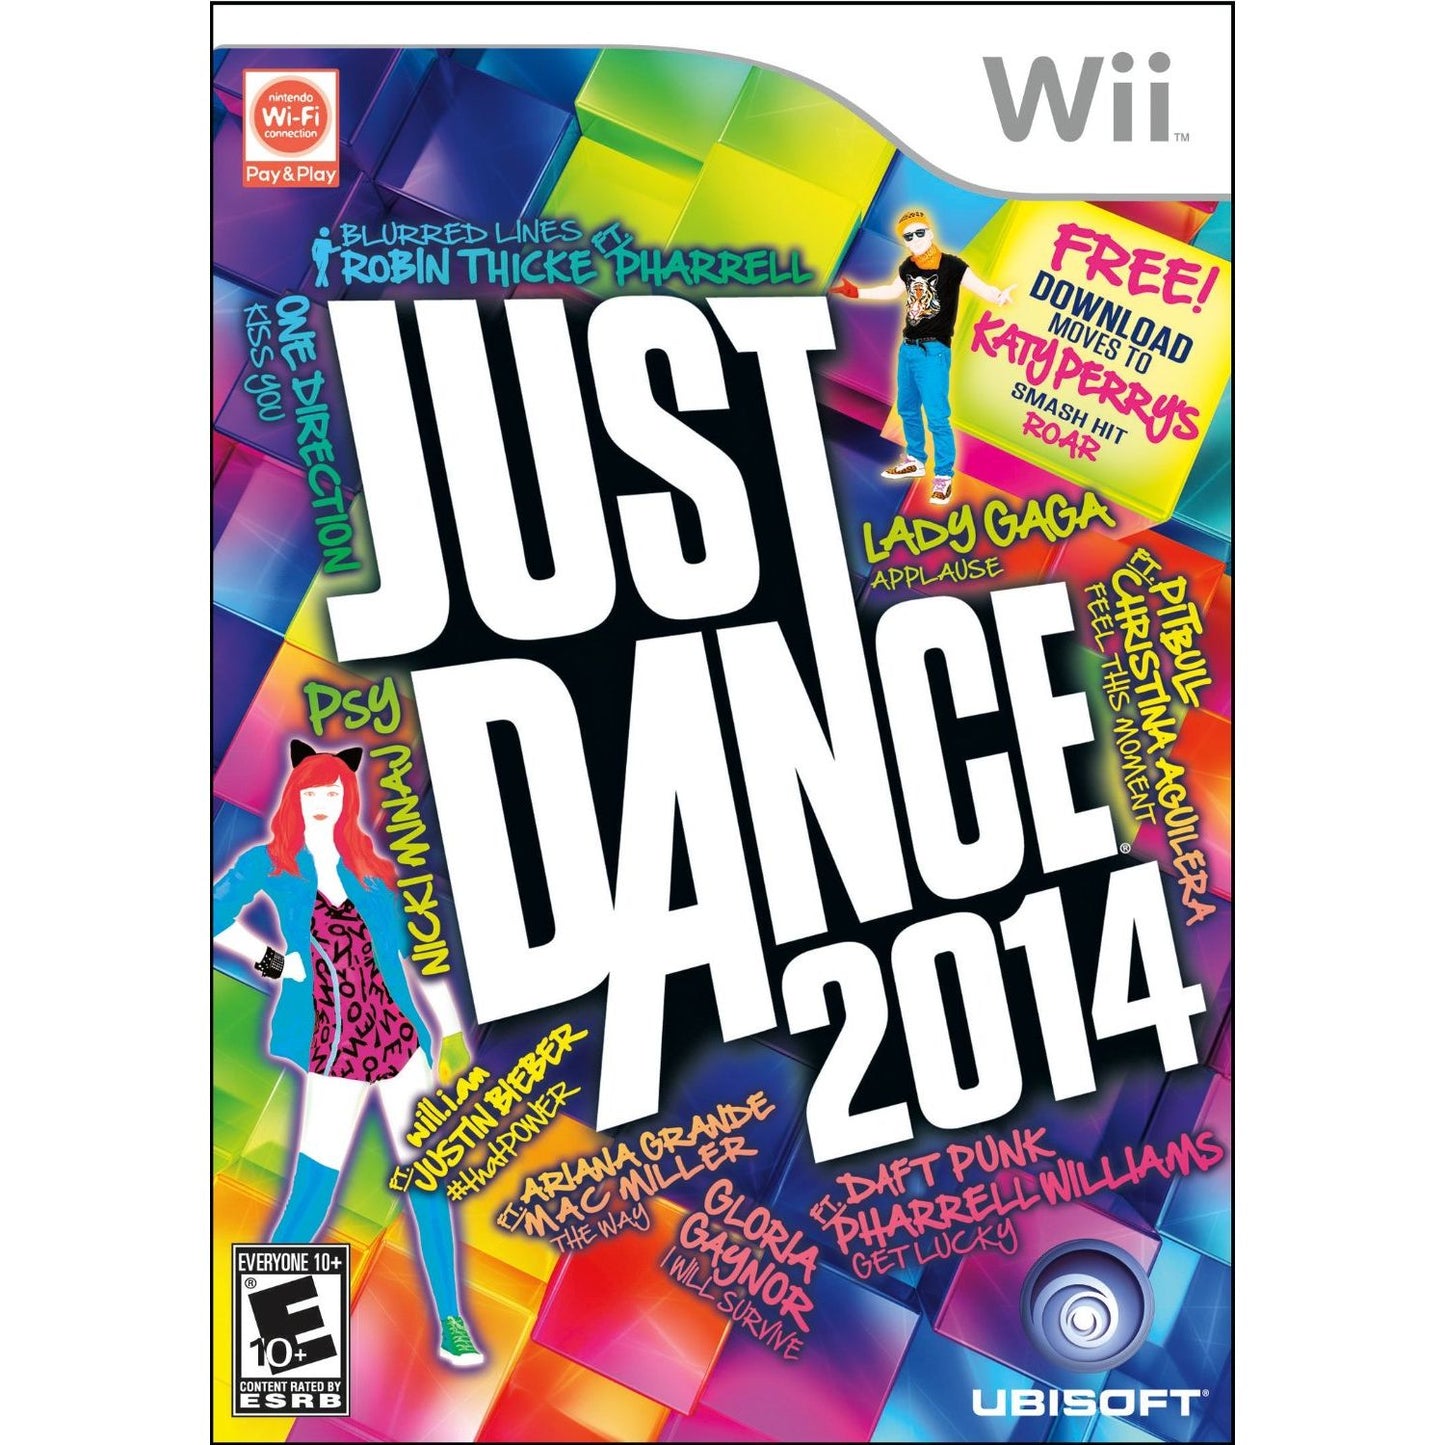 JUST DANCE 2014 (used)